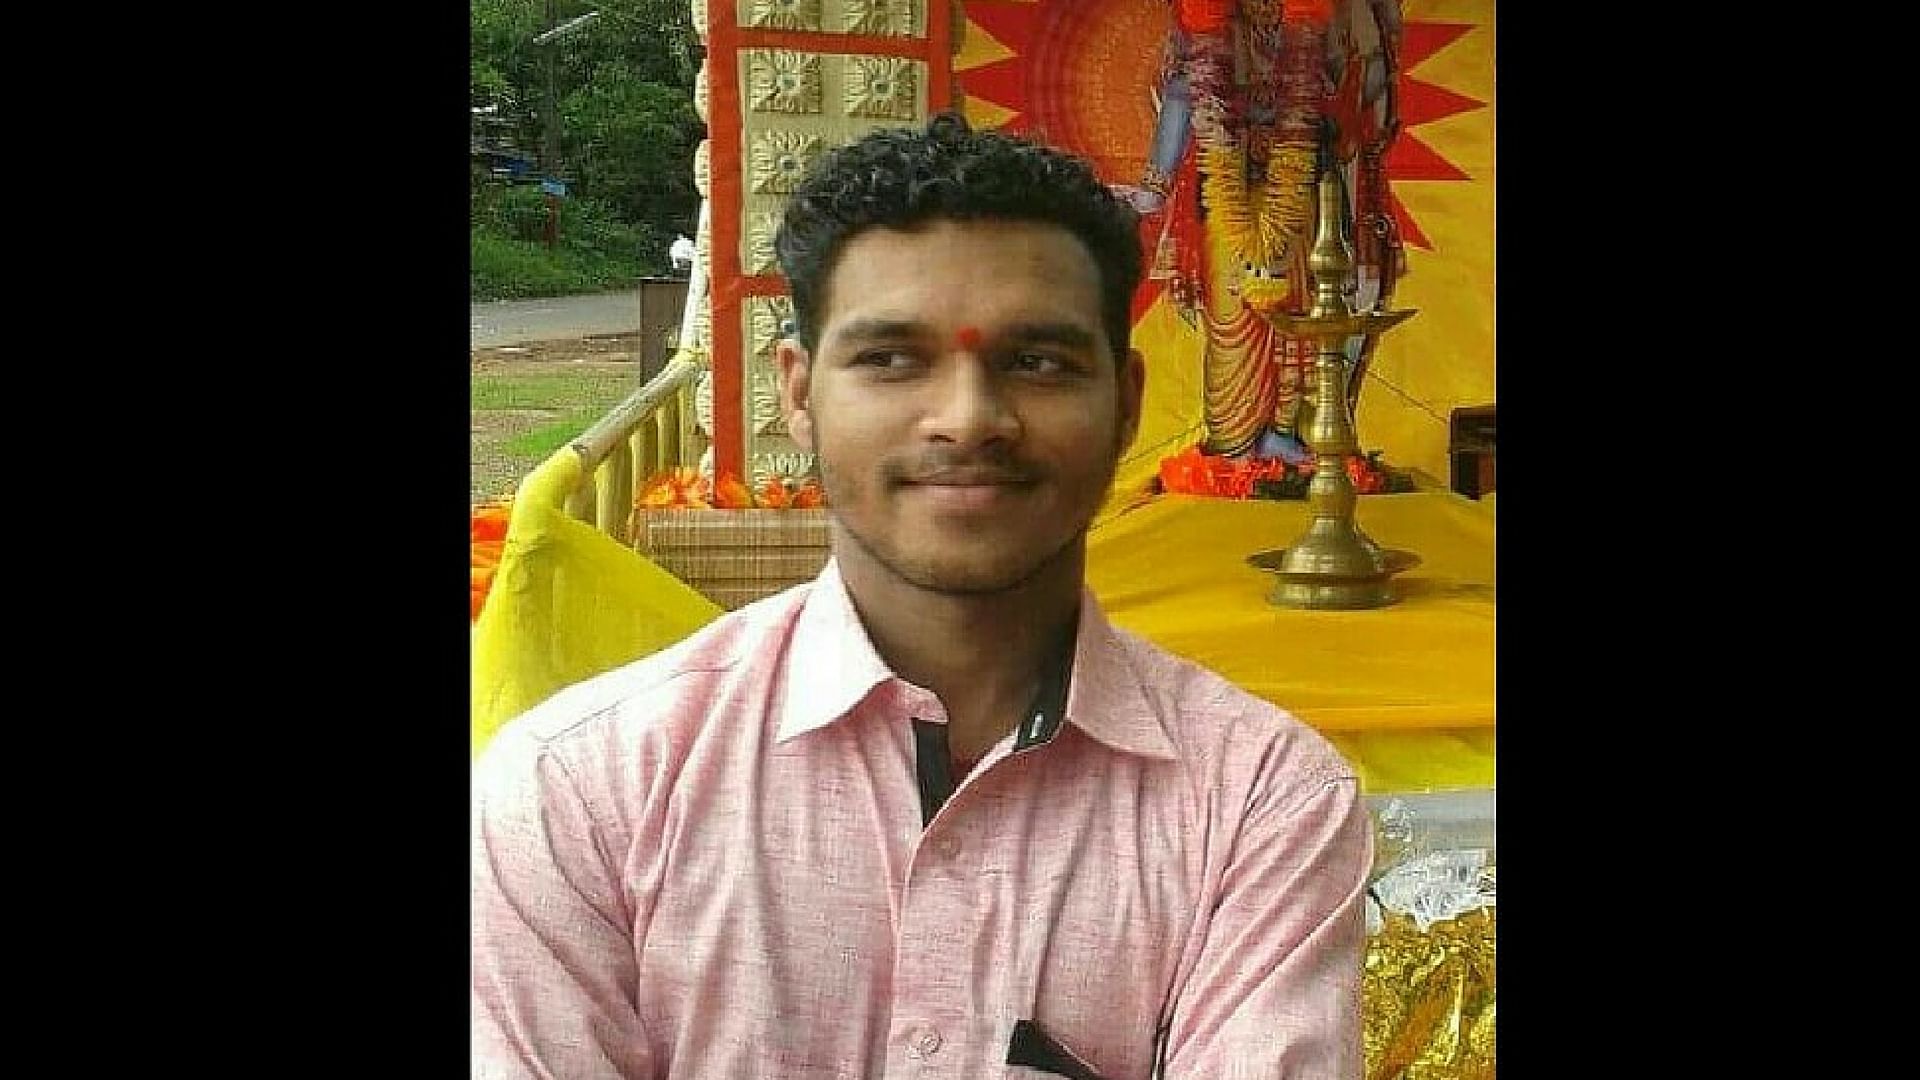 Sujit was attacked and murdered before his family at his house in Kannur. (Photo Courtesy: <a href="http://www.thenewsminute.com/article/kerala-rss-worker-stabbed-death-allegedly-cpm-workers-kannur-39047">The News Minute</a>)